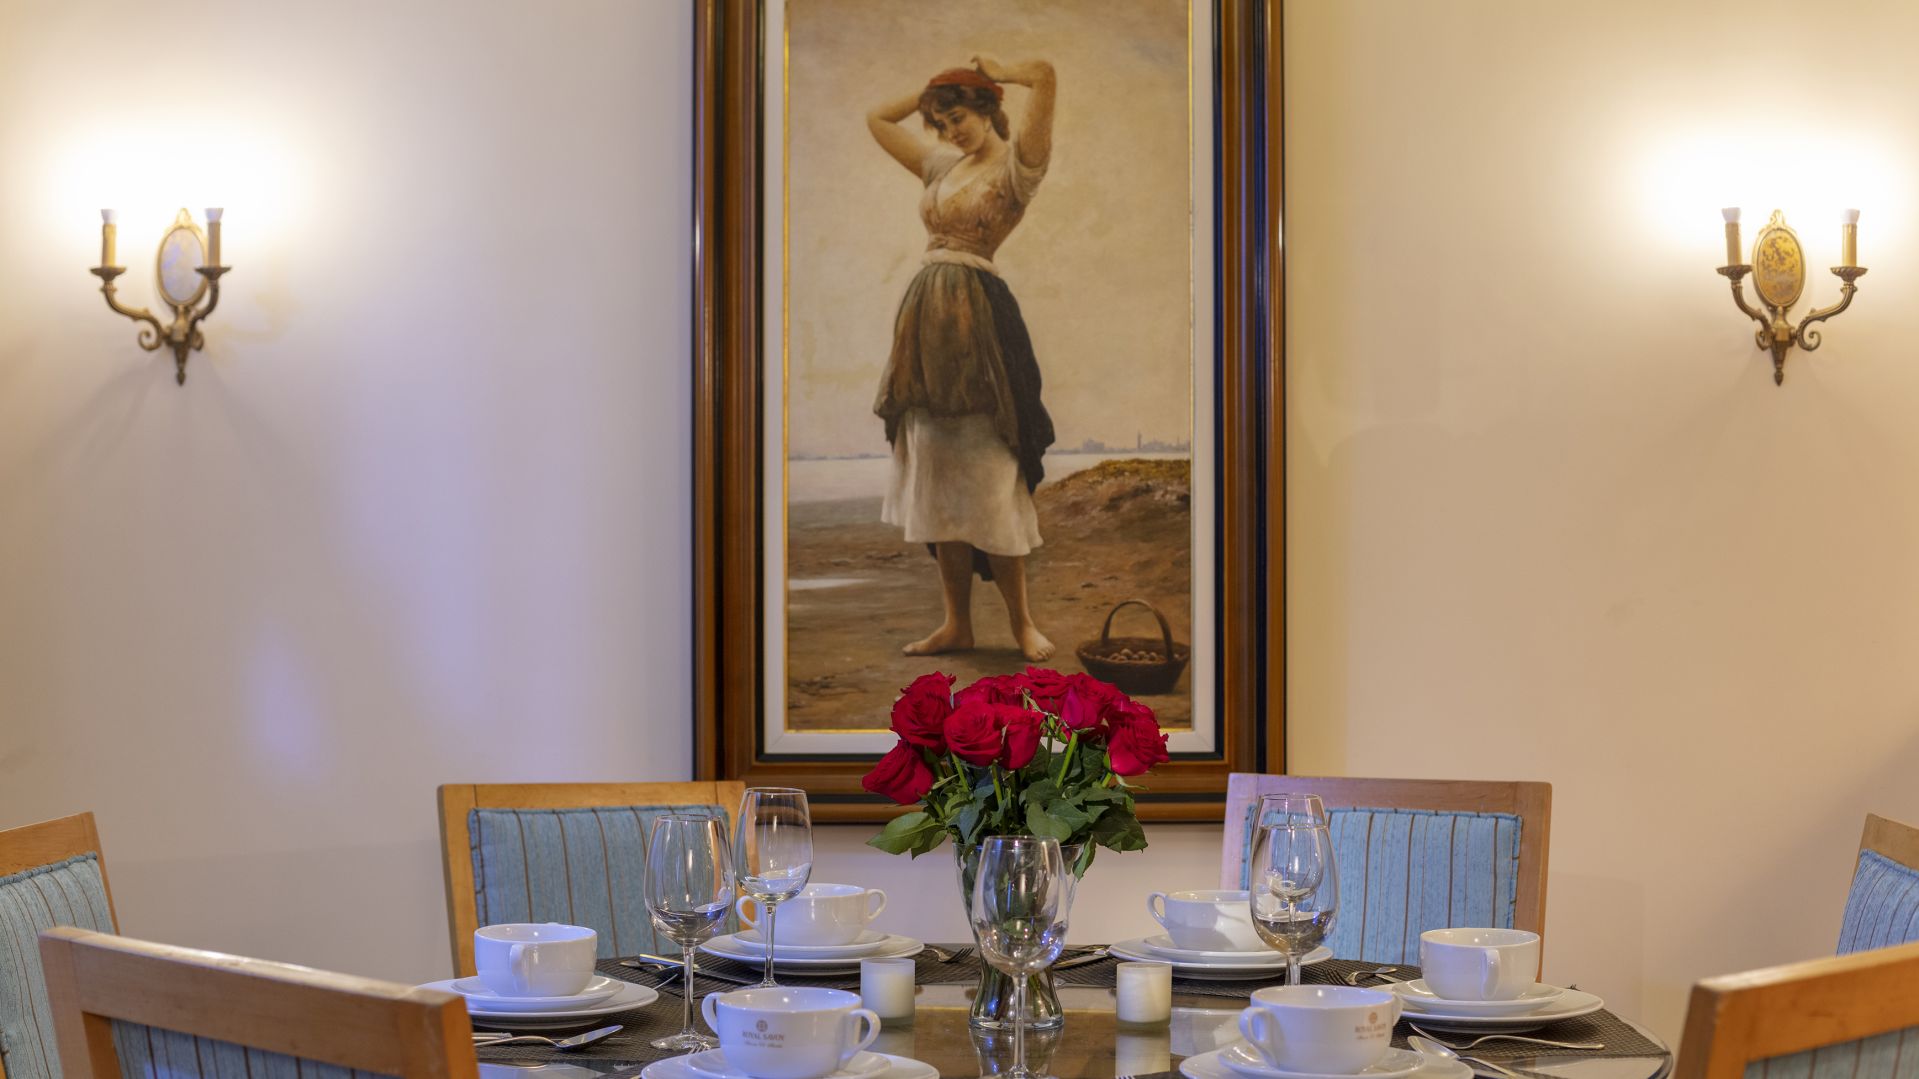 A Table With A Vase Of Flowers And A Painting On The Wall